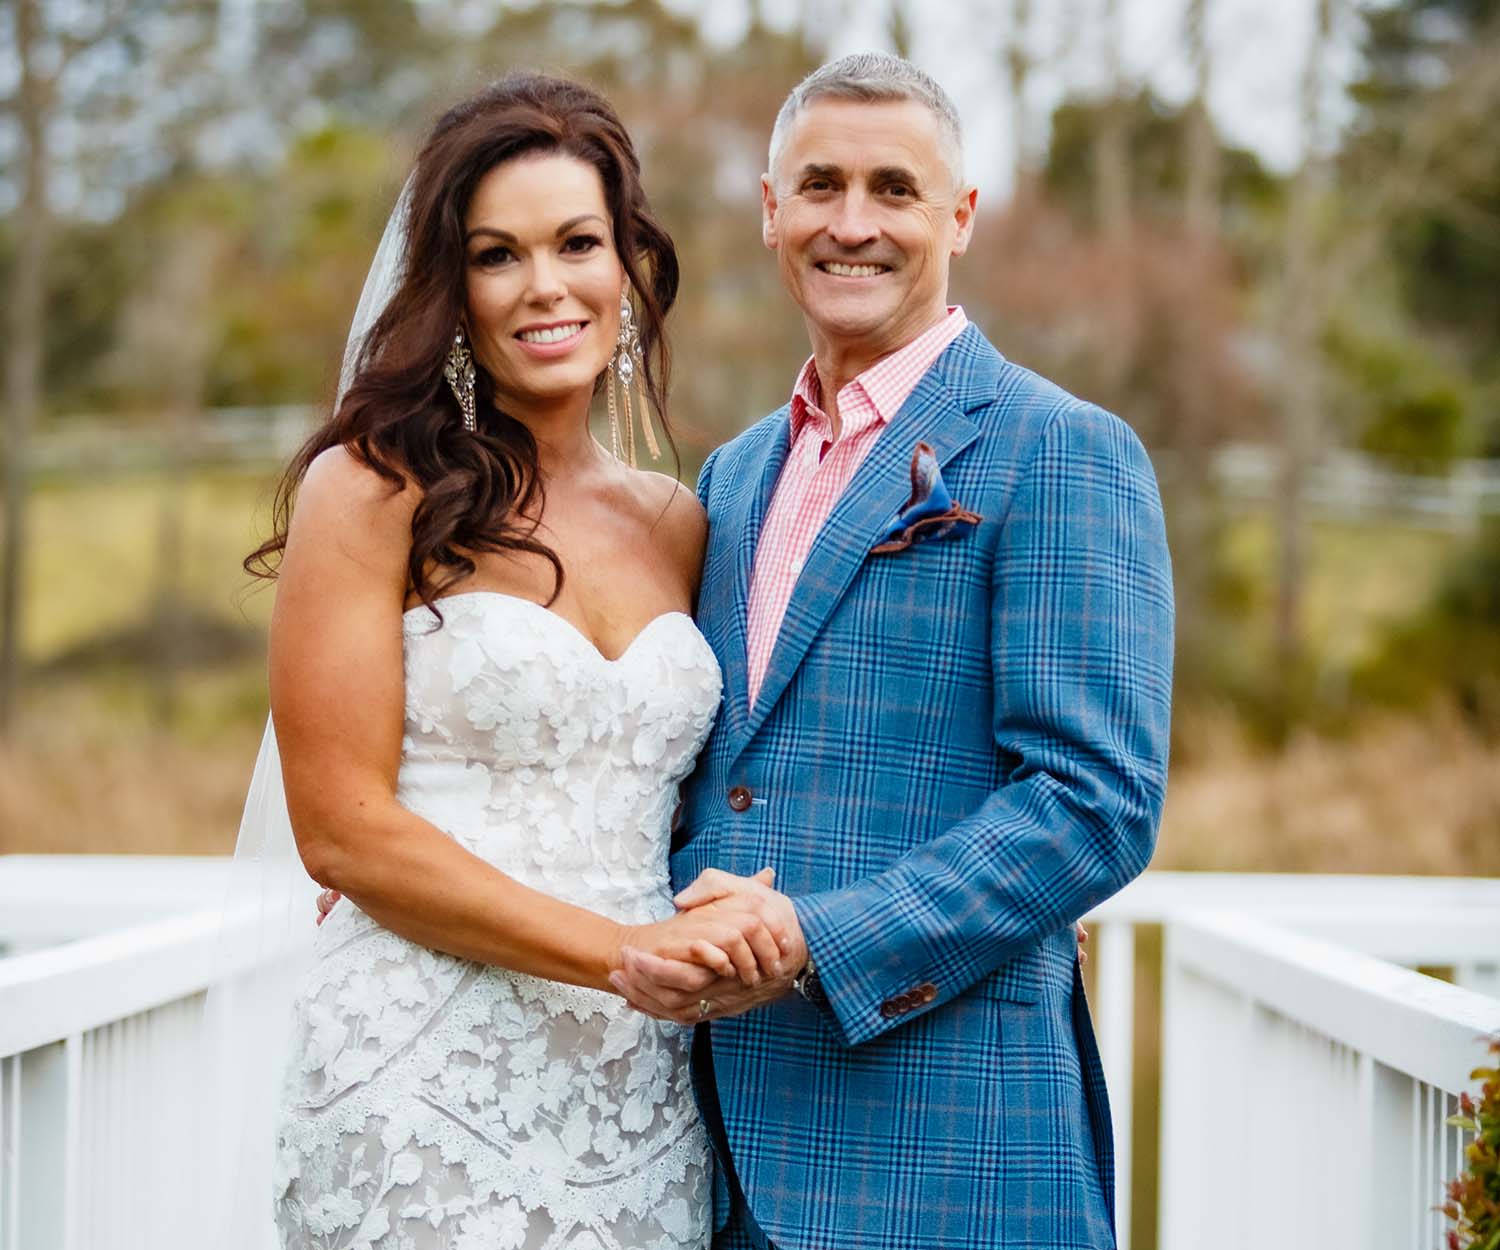 MAFS’ Christopher Wilson reveals he tried to pull out of the show before filming started